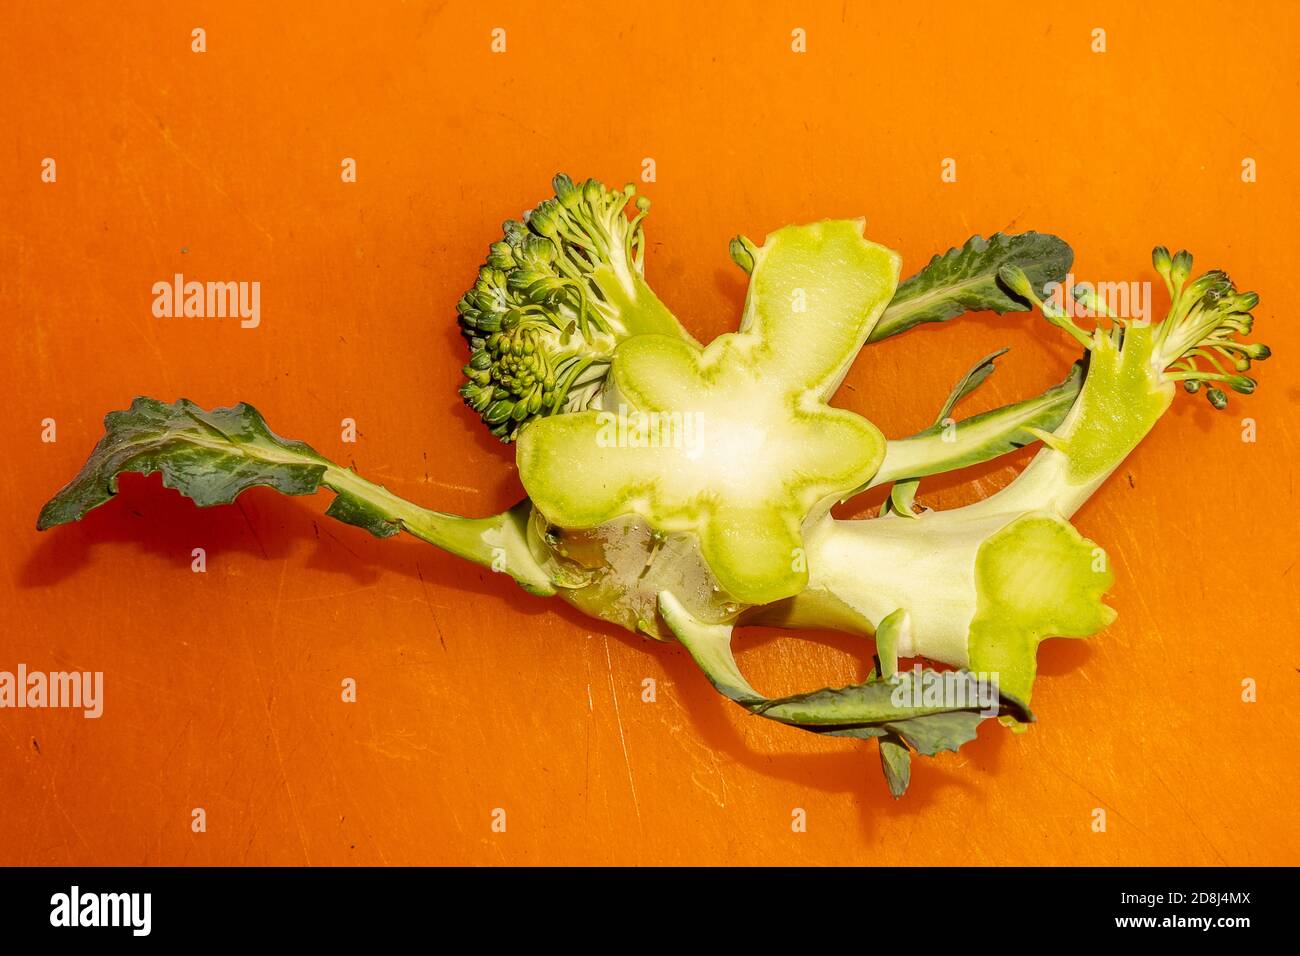 The end of a trimmed broccoli crown in New York on Wednesday, October 28, 2020. (© Richard B. Levine) Stock Photo